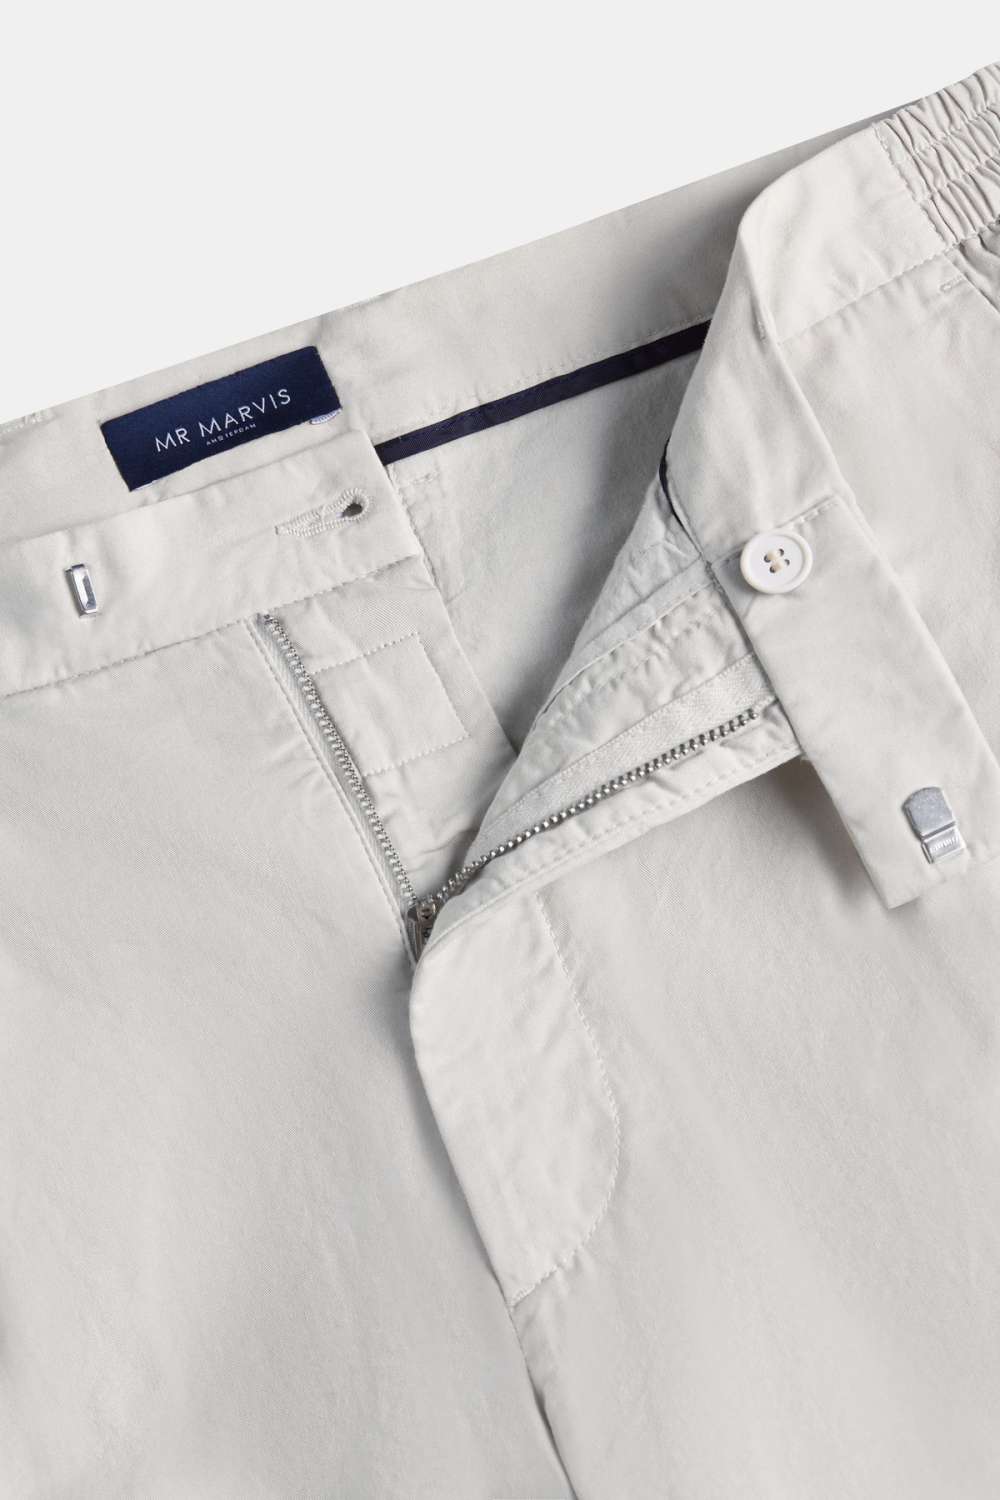 Gullwings * The Classic Chinos